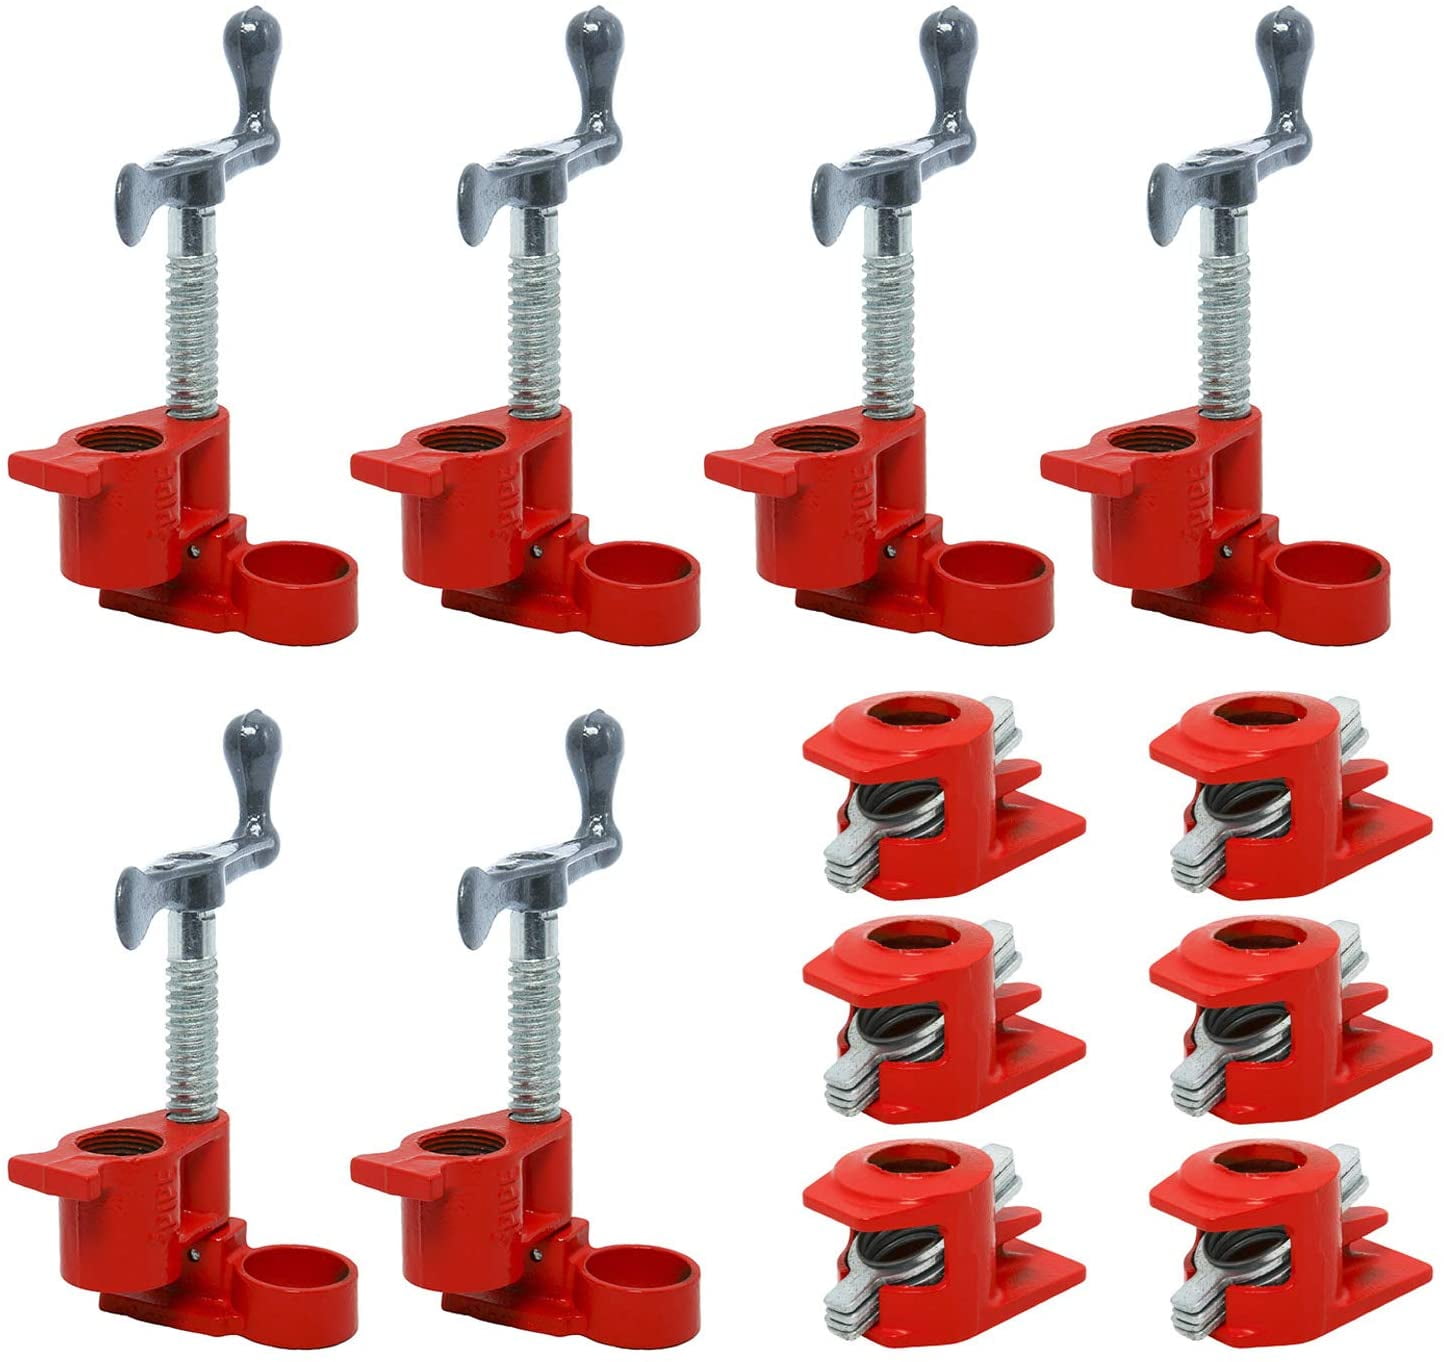 4 Pack 1/2" Wood Gluing Pipe Clamp Set Heavy Duty Woodworking Cast Iron